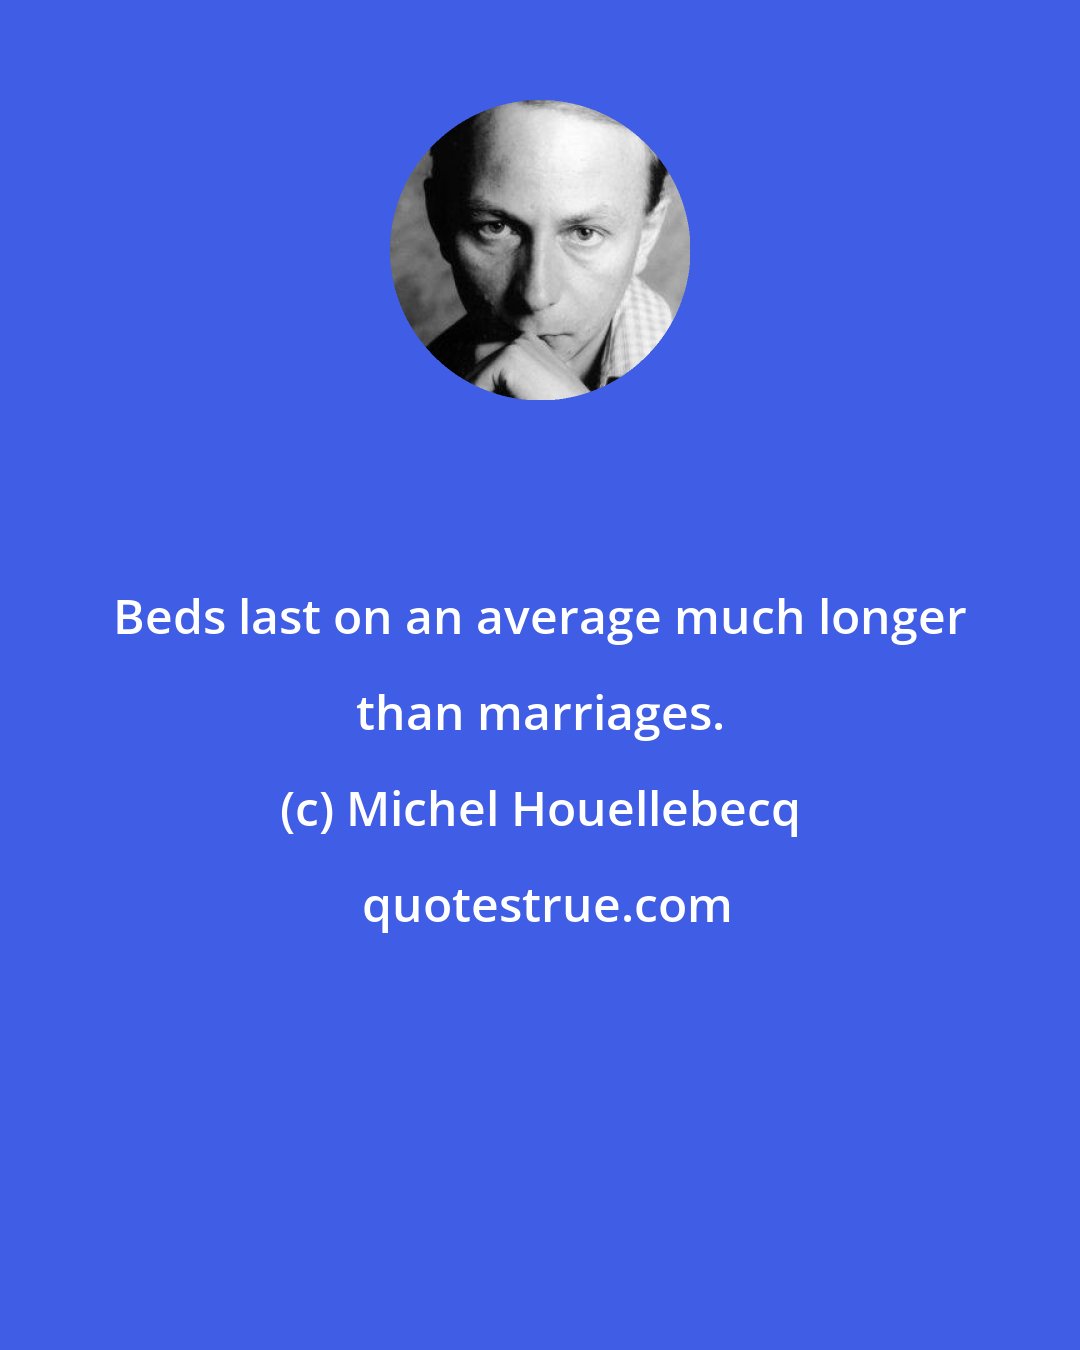 Michel Houellebecq: Beds last on an average much longer than marriages.